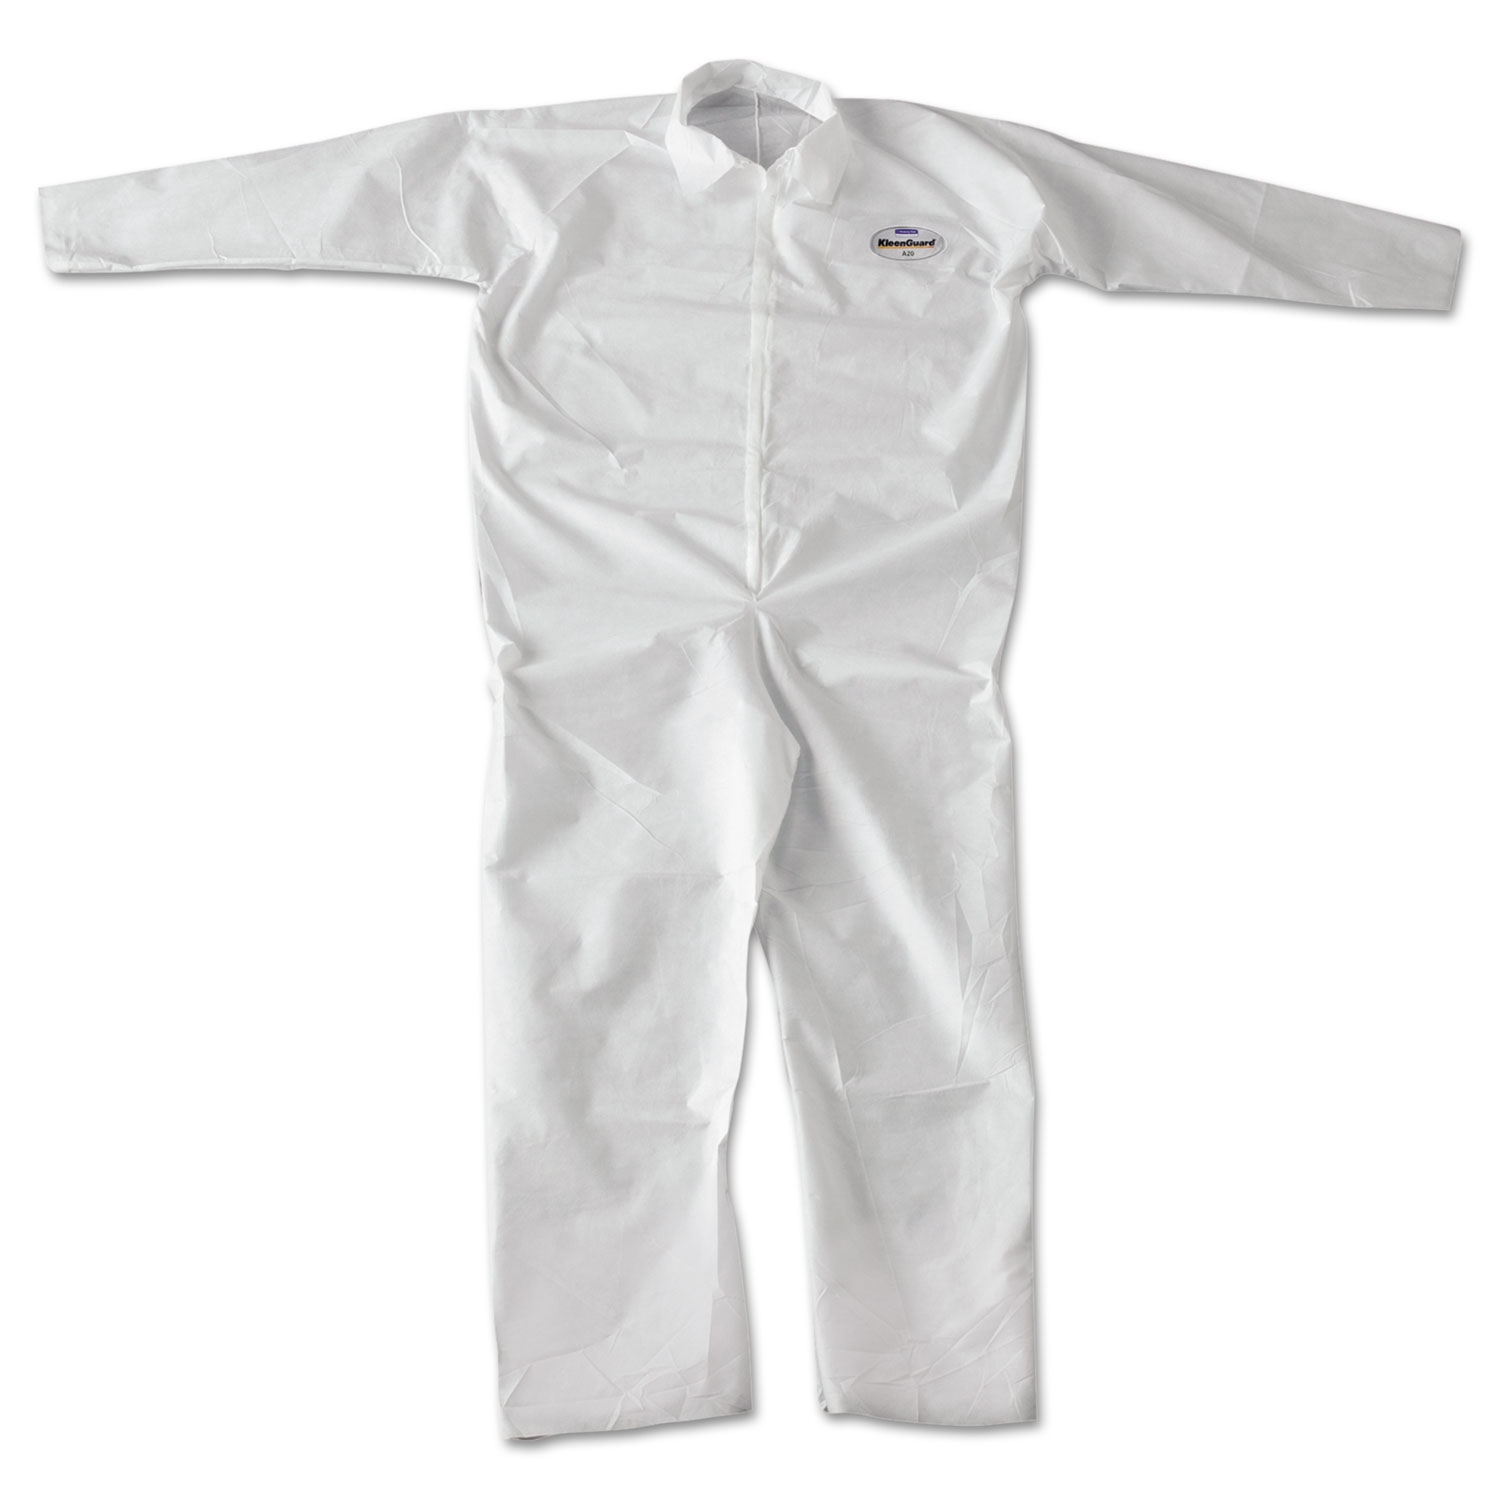 A20 Breathable Particle-Pro Coveralls, Zip, 2X-Large, White, 24/Carton